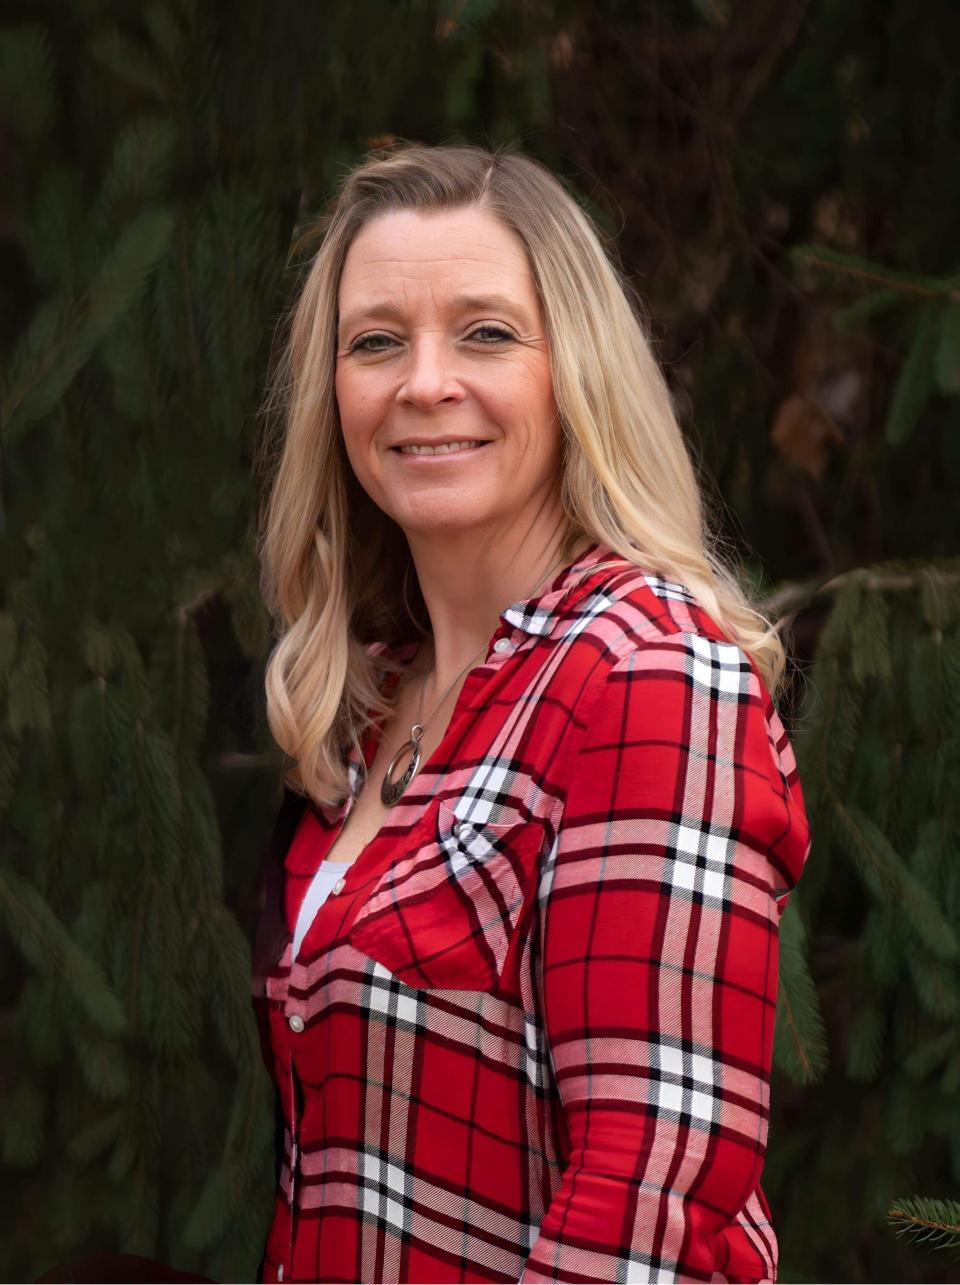 Kristy VanMetre, candidate for the at-large seat on the Shawnee Heights Board of Education.